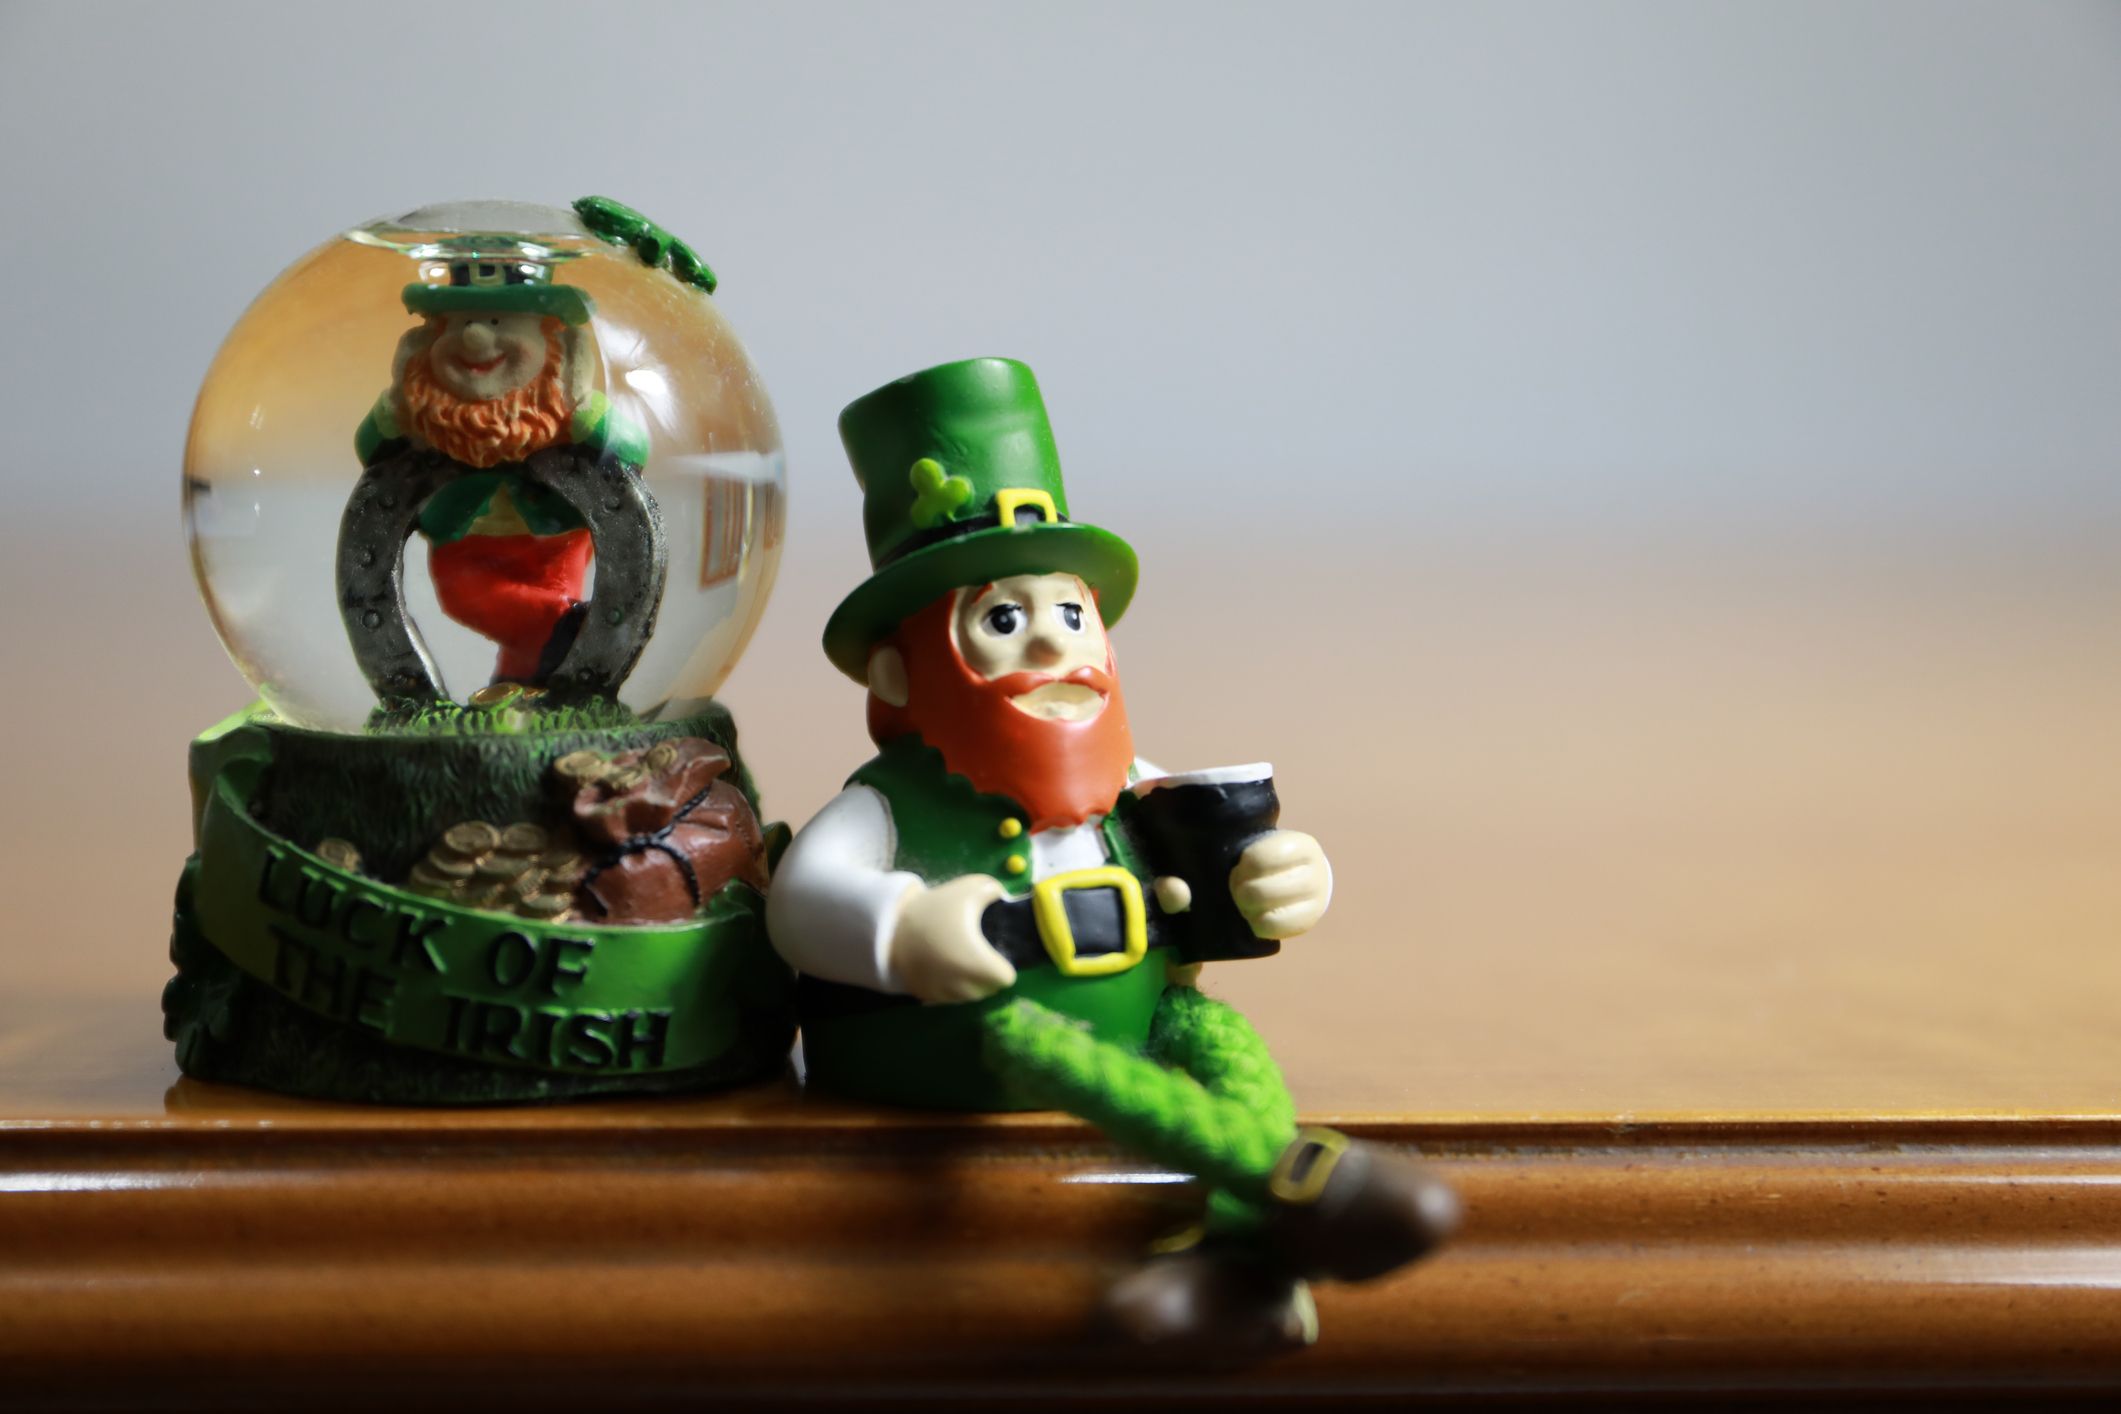 7 St. Patrick's Day traditions explained